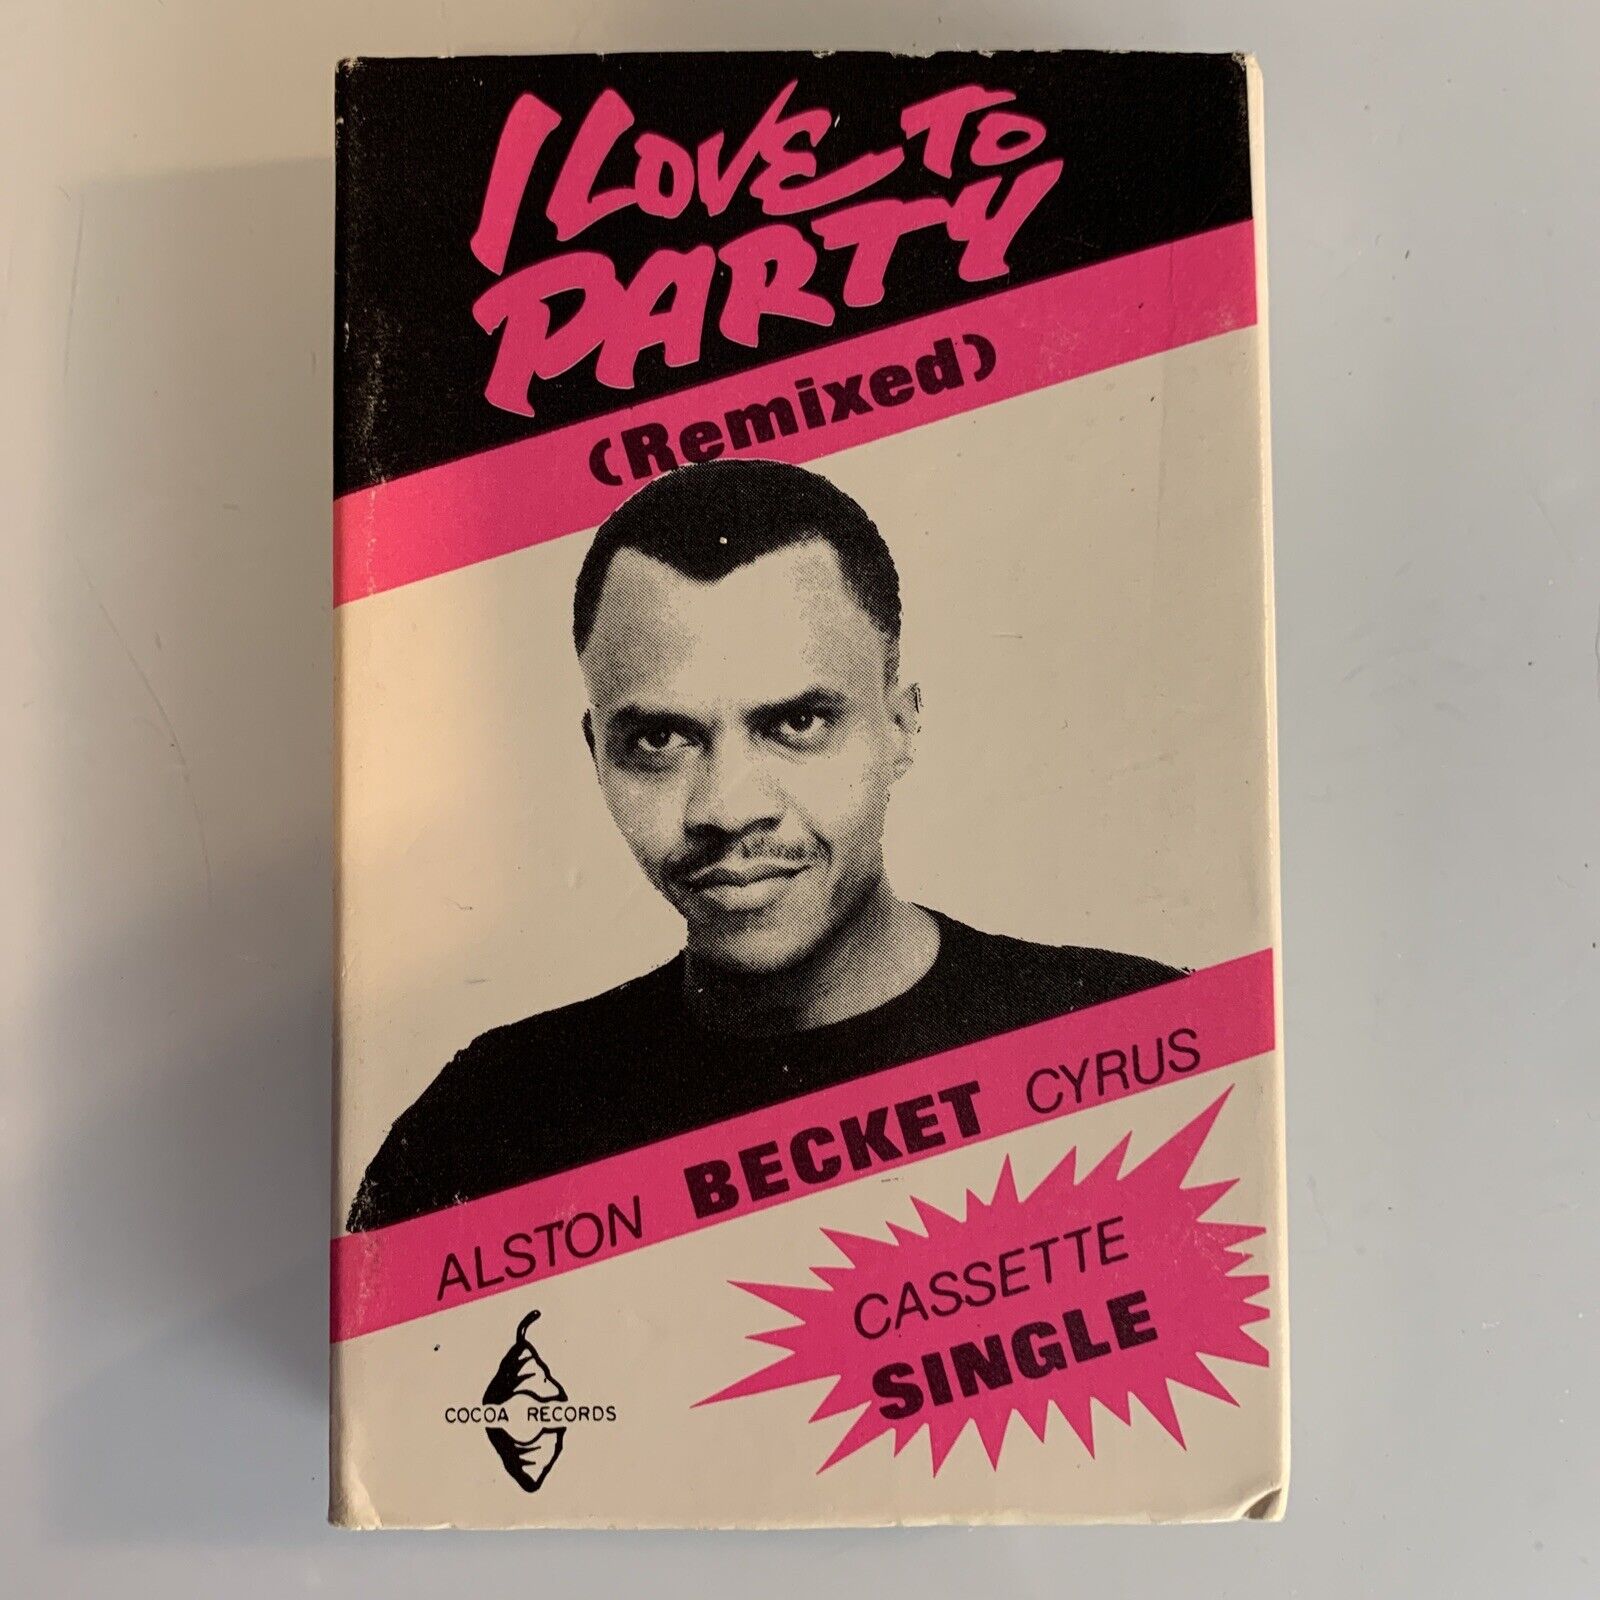 Alston Becket Cyrus I Love To Party (Cassette) Single